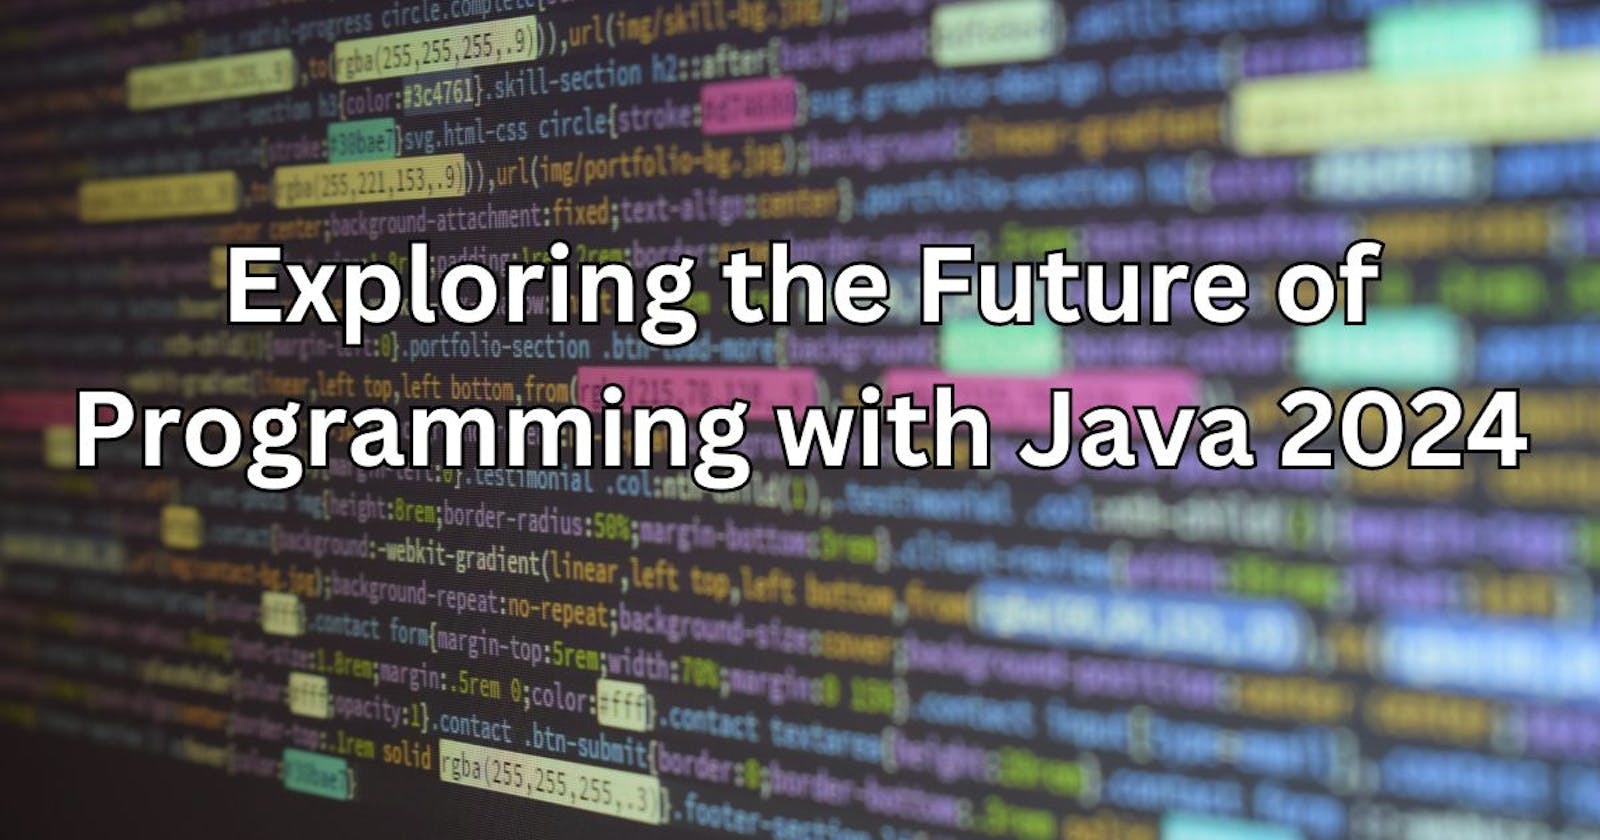 Exploring the Future of Programming with Java 2024